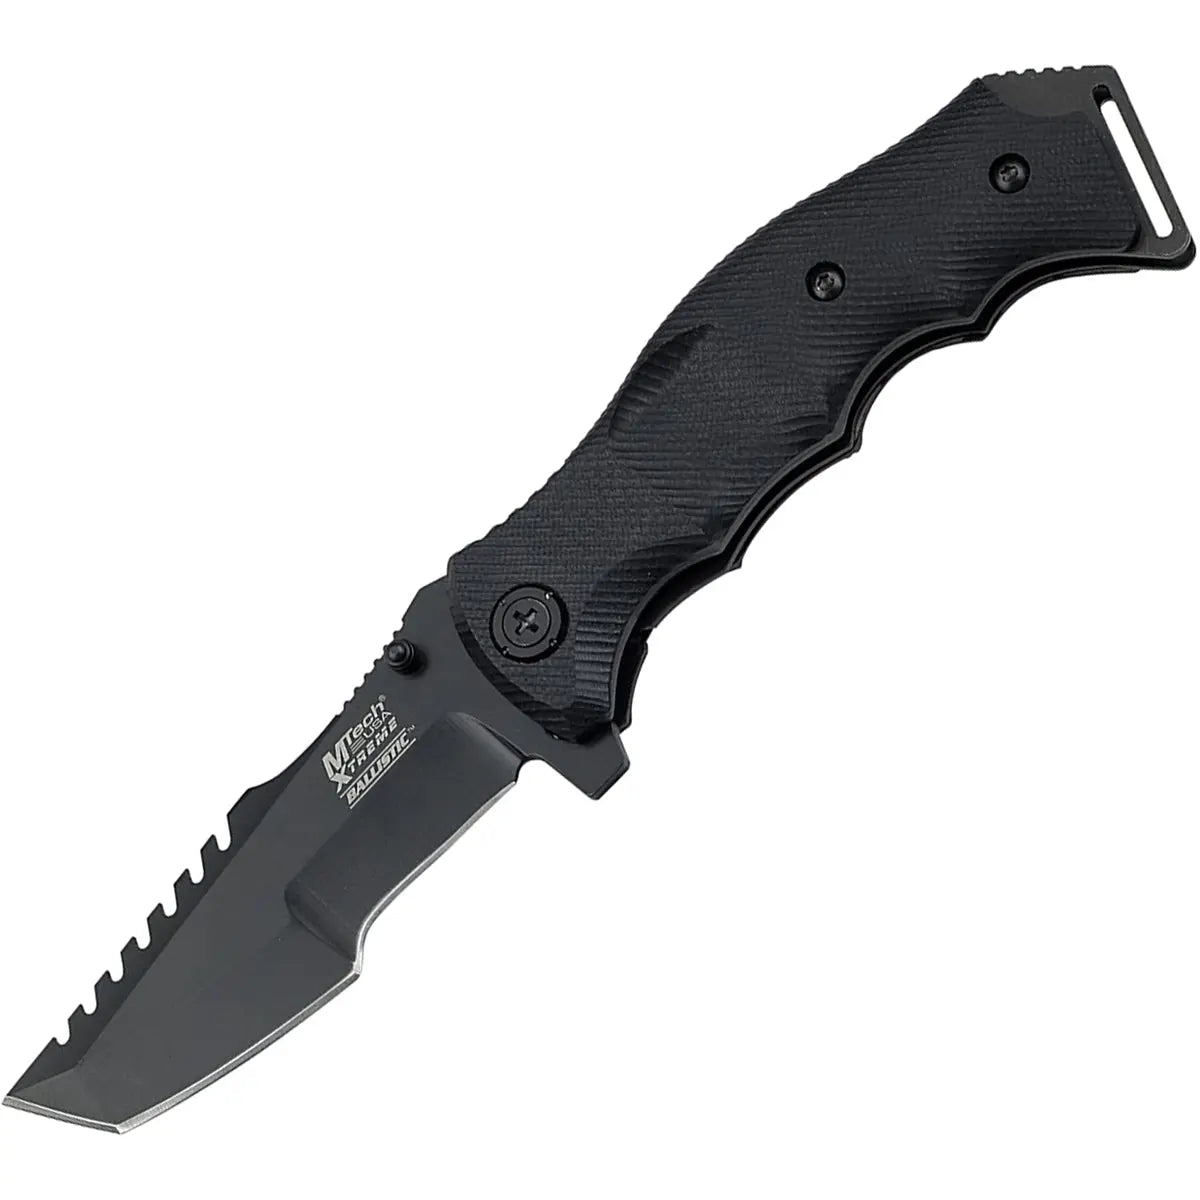 MTech USA Xtreme Tactical Fighting Spring Assisted Knife Tanto Blade, MX-A805 M-Tech